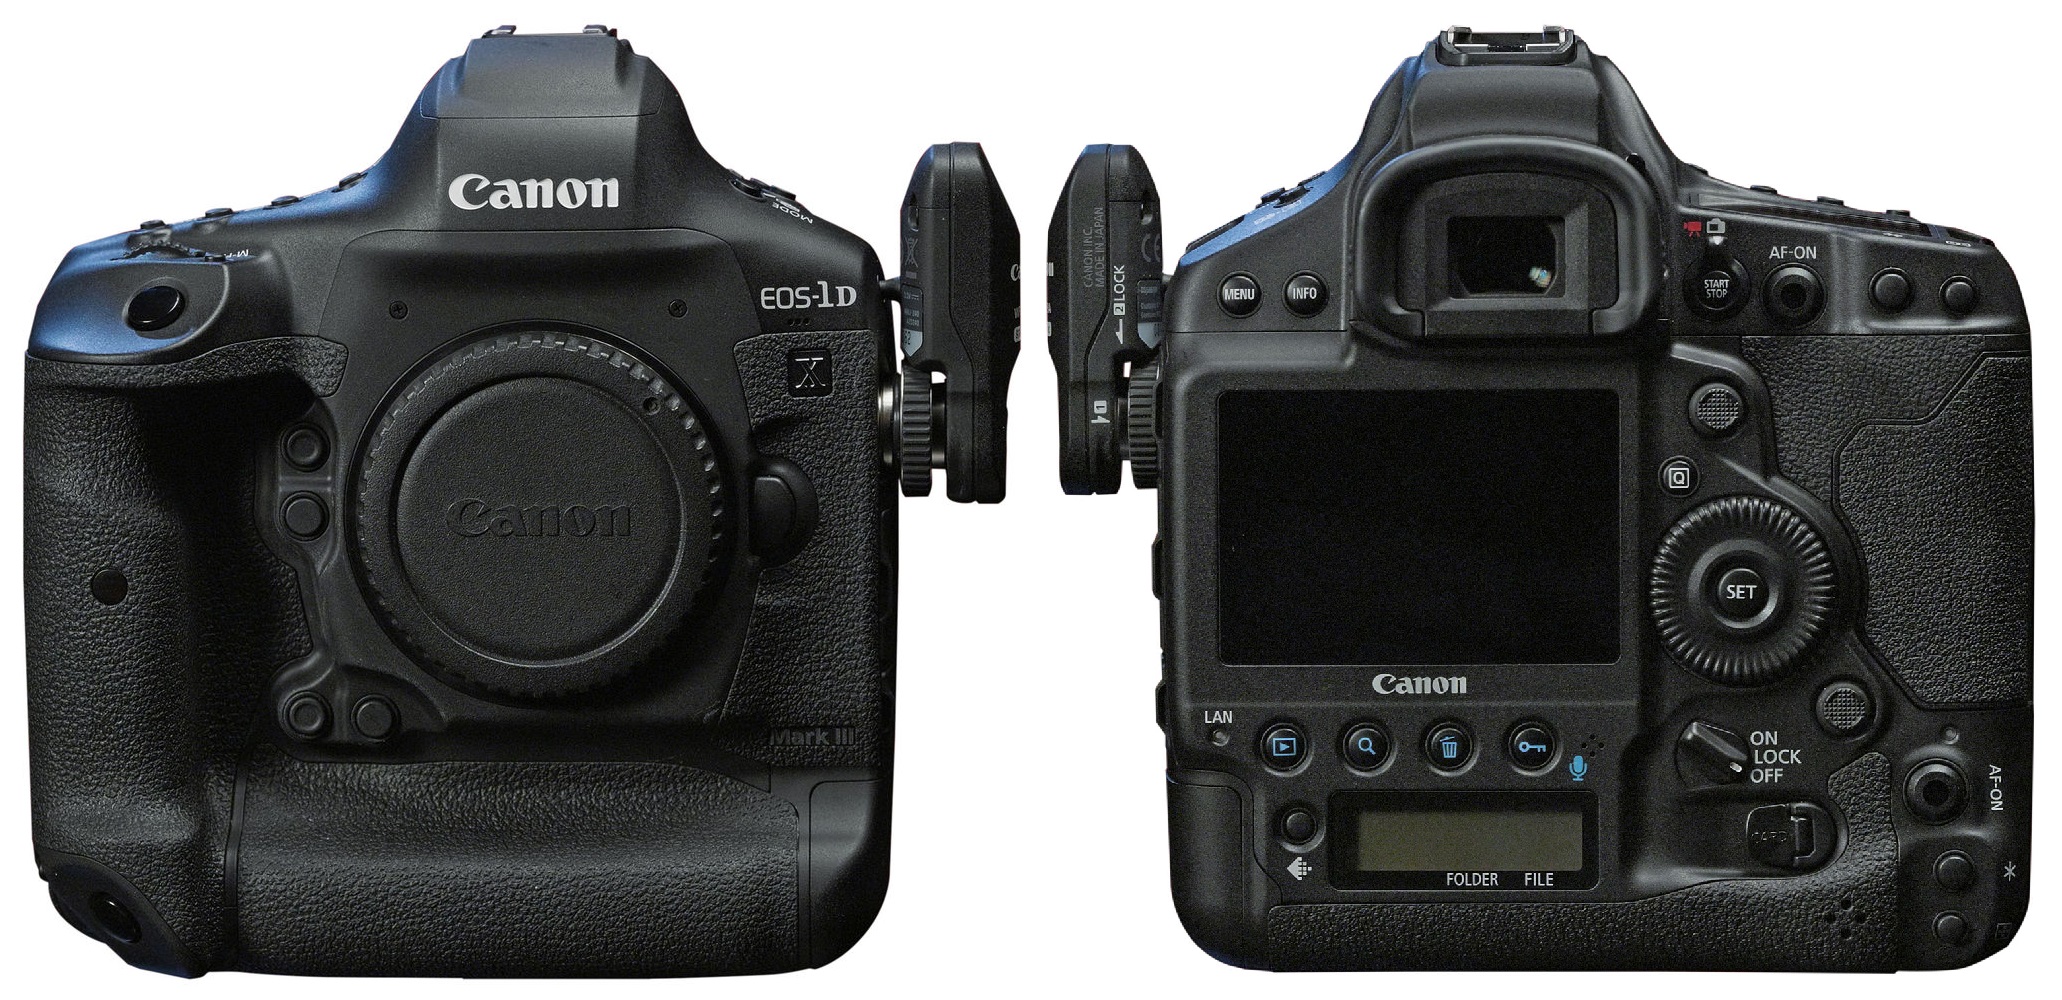 Eos 1d mark iii review